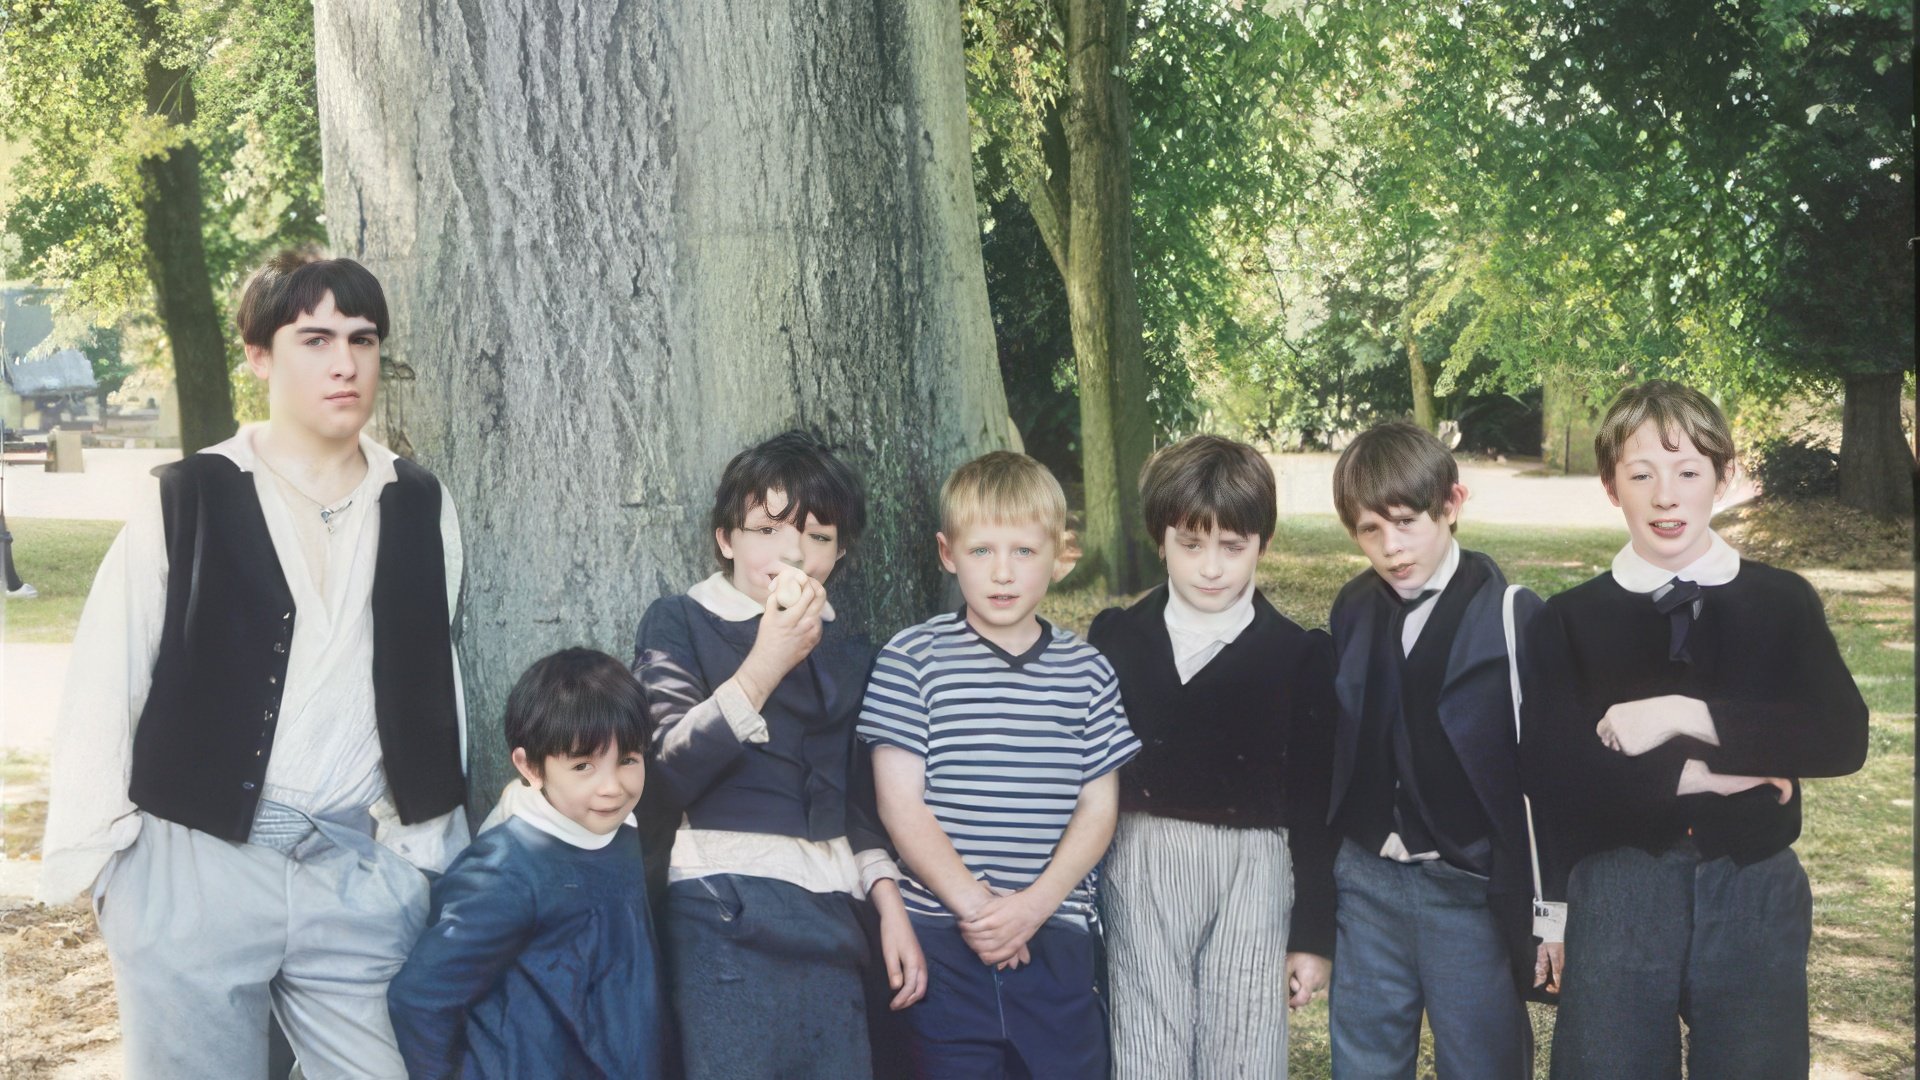 Daniel Radcfille as a kid (third from right)